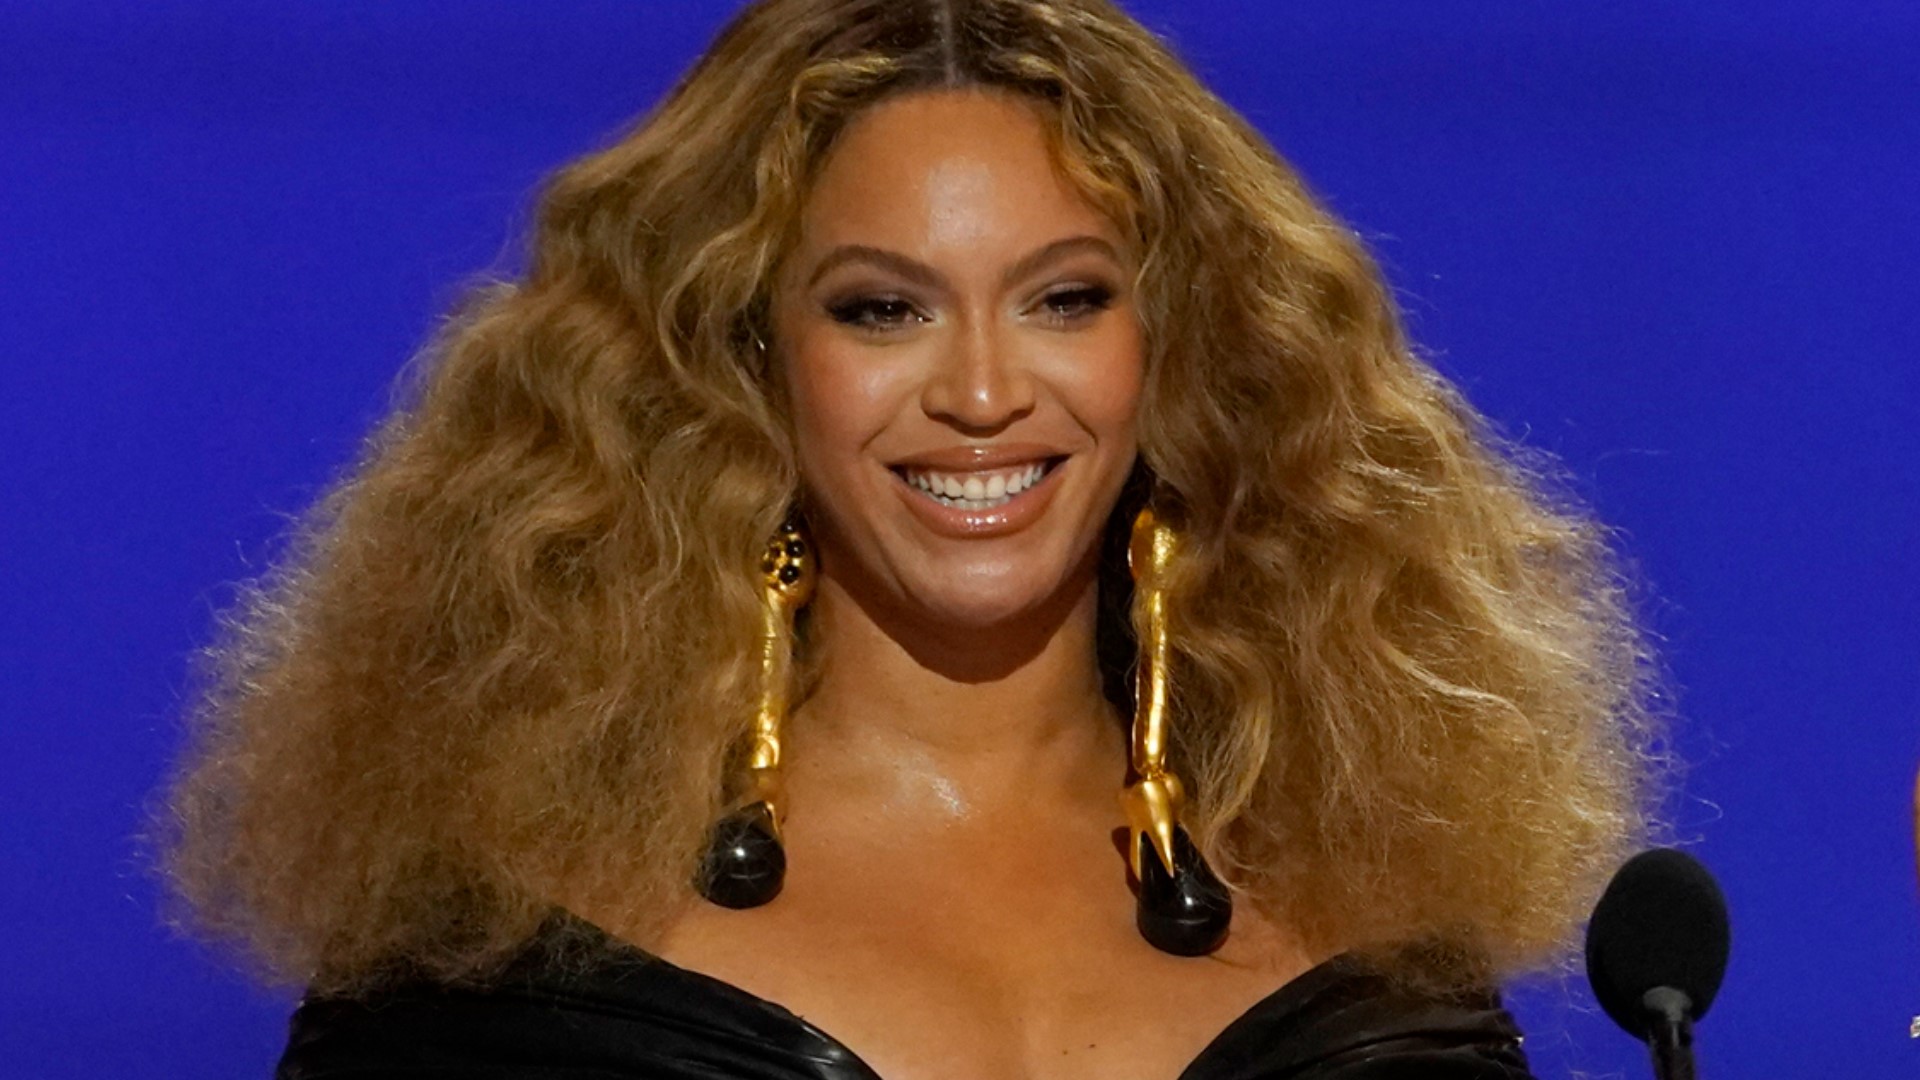 Beyoncé will be making tour stops in Minneapolis, Chicago and St. Louis.